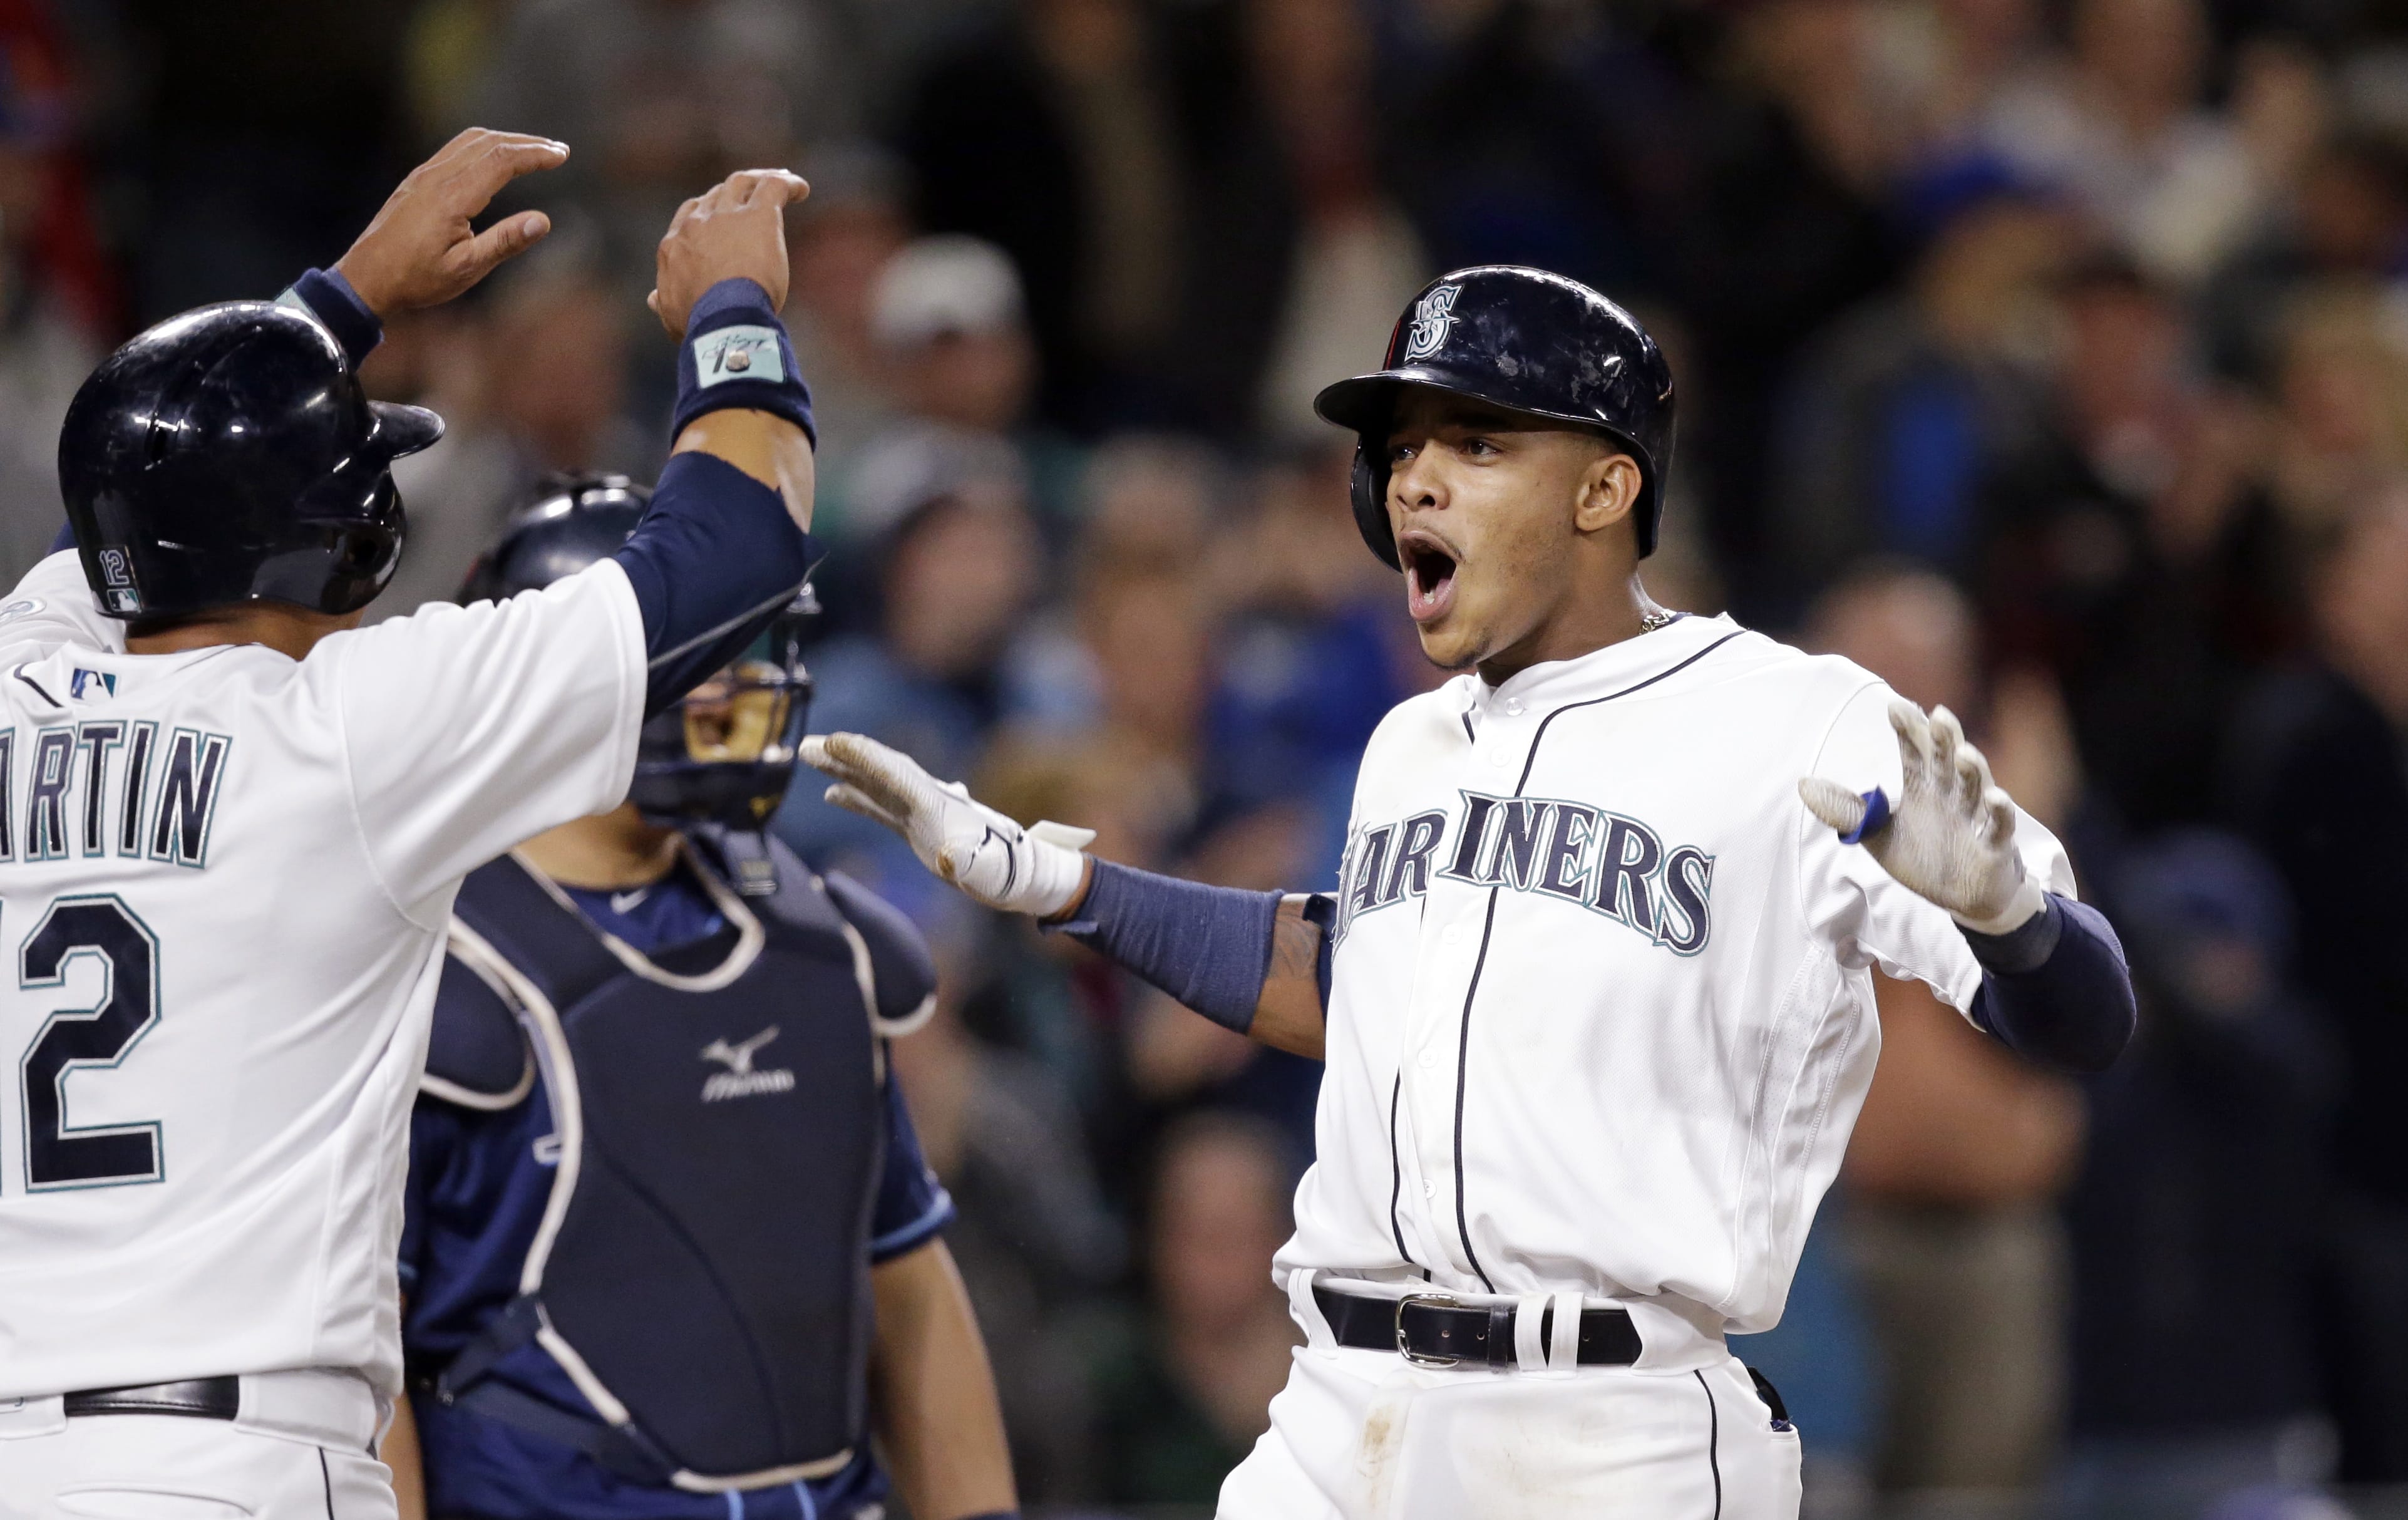 Seattle Mariners' Ketel Marte, right, is greeted by Leonys Martin as Marte crosses home on his three-run home run and Tampa Bay Rays catcher Hank Conger looks on in the sixth inning of a baseball game Monday, May 9, 2016, in Seattle.